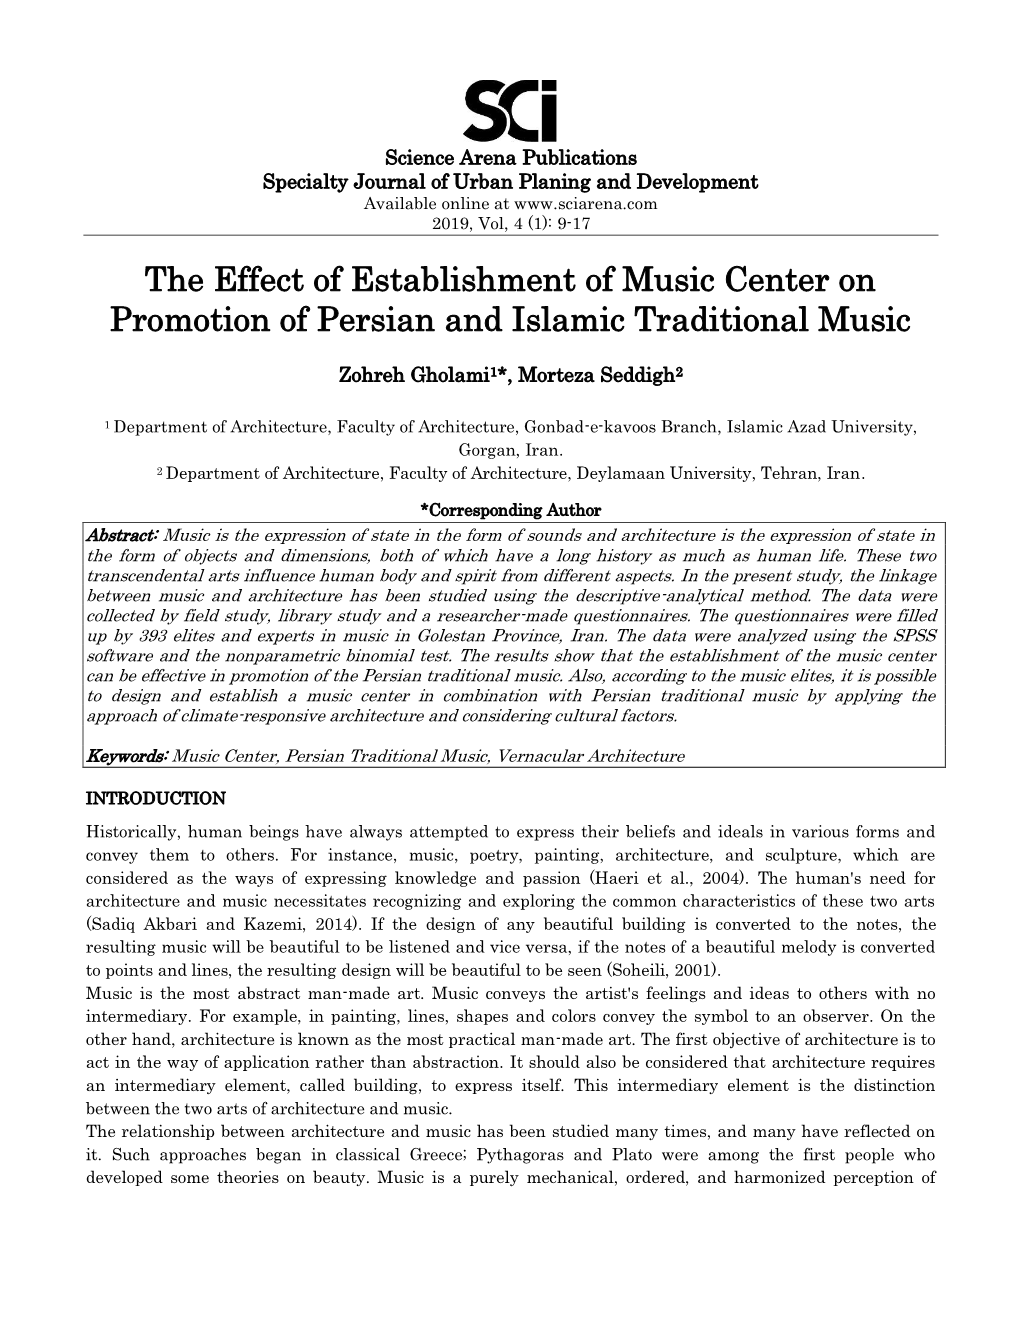 The Effect of Establishment of Music Center on Promotion of Persian and Islamic Traditional Music